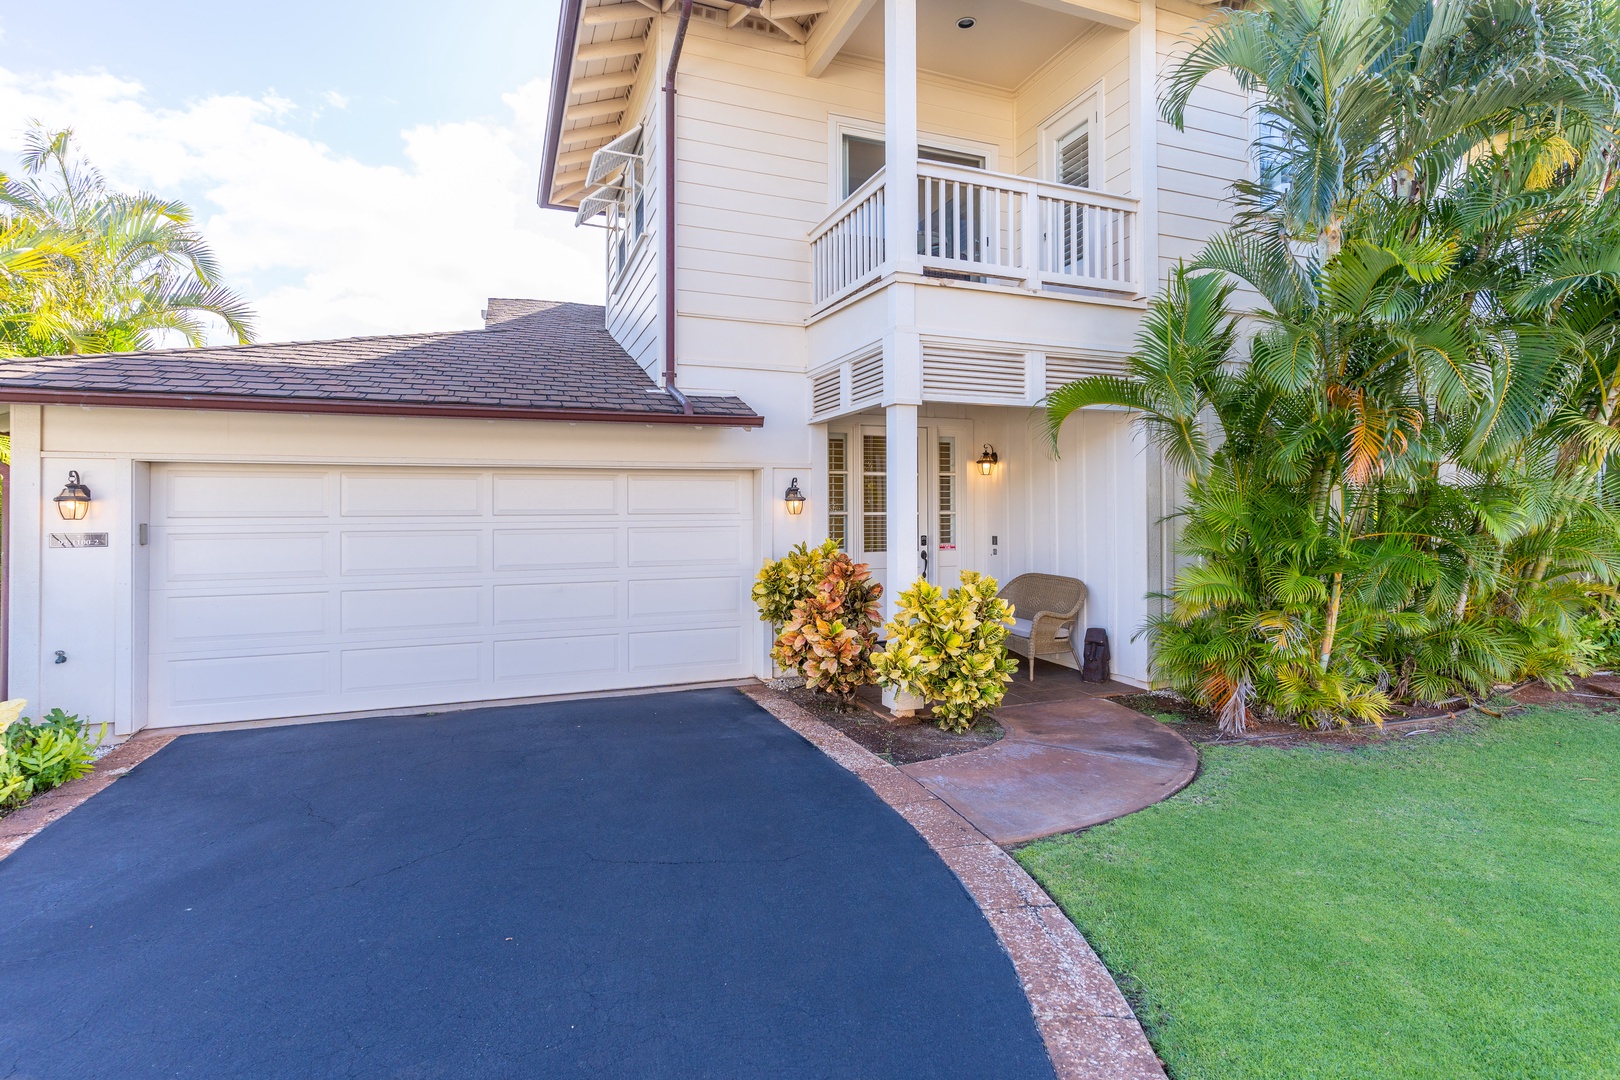 Kapolei Vacation Rentals, Coconut Plantation 1100-2 - The paved area and garage at the home.